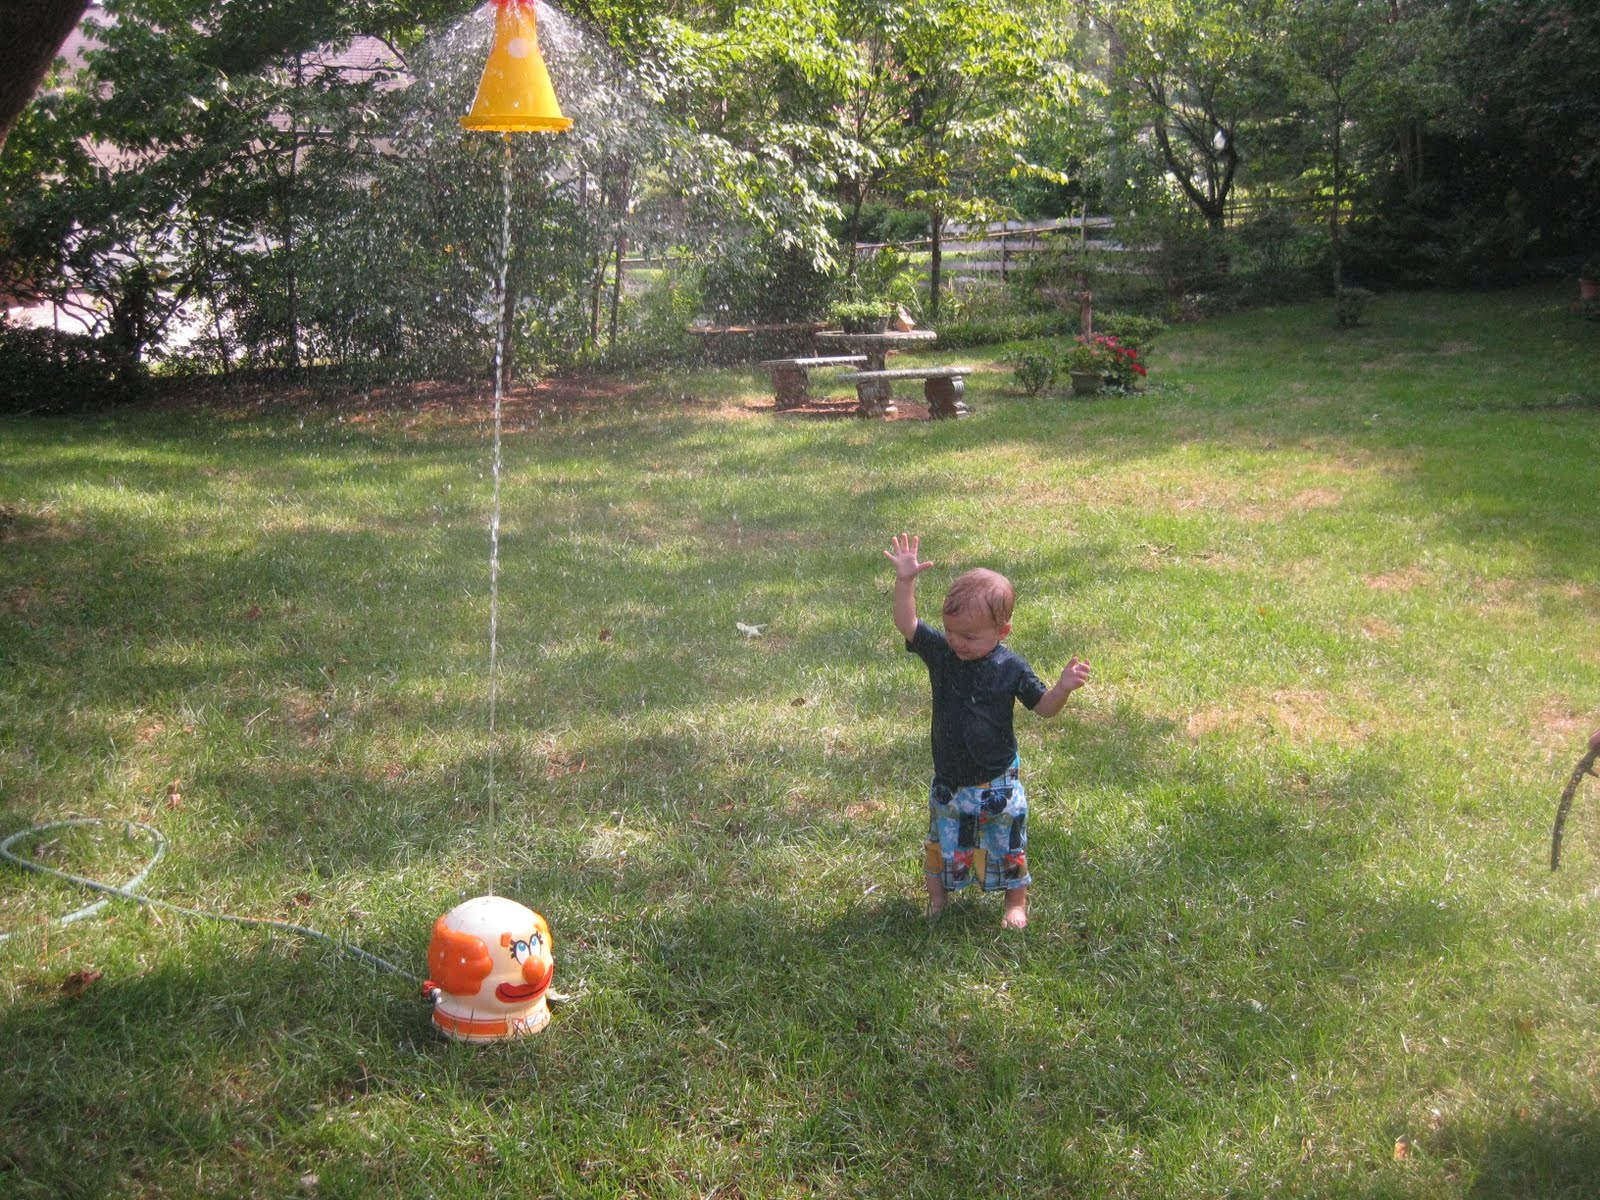 Good times with the clown sprinkler — Shannon Dingle